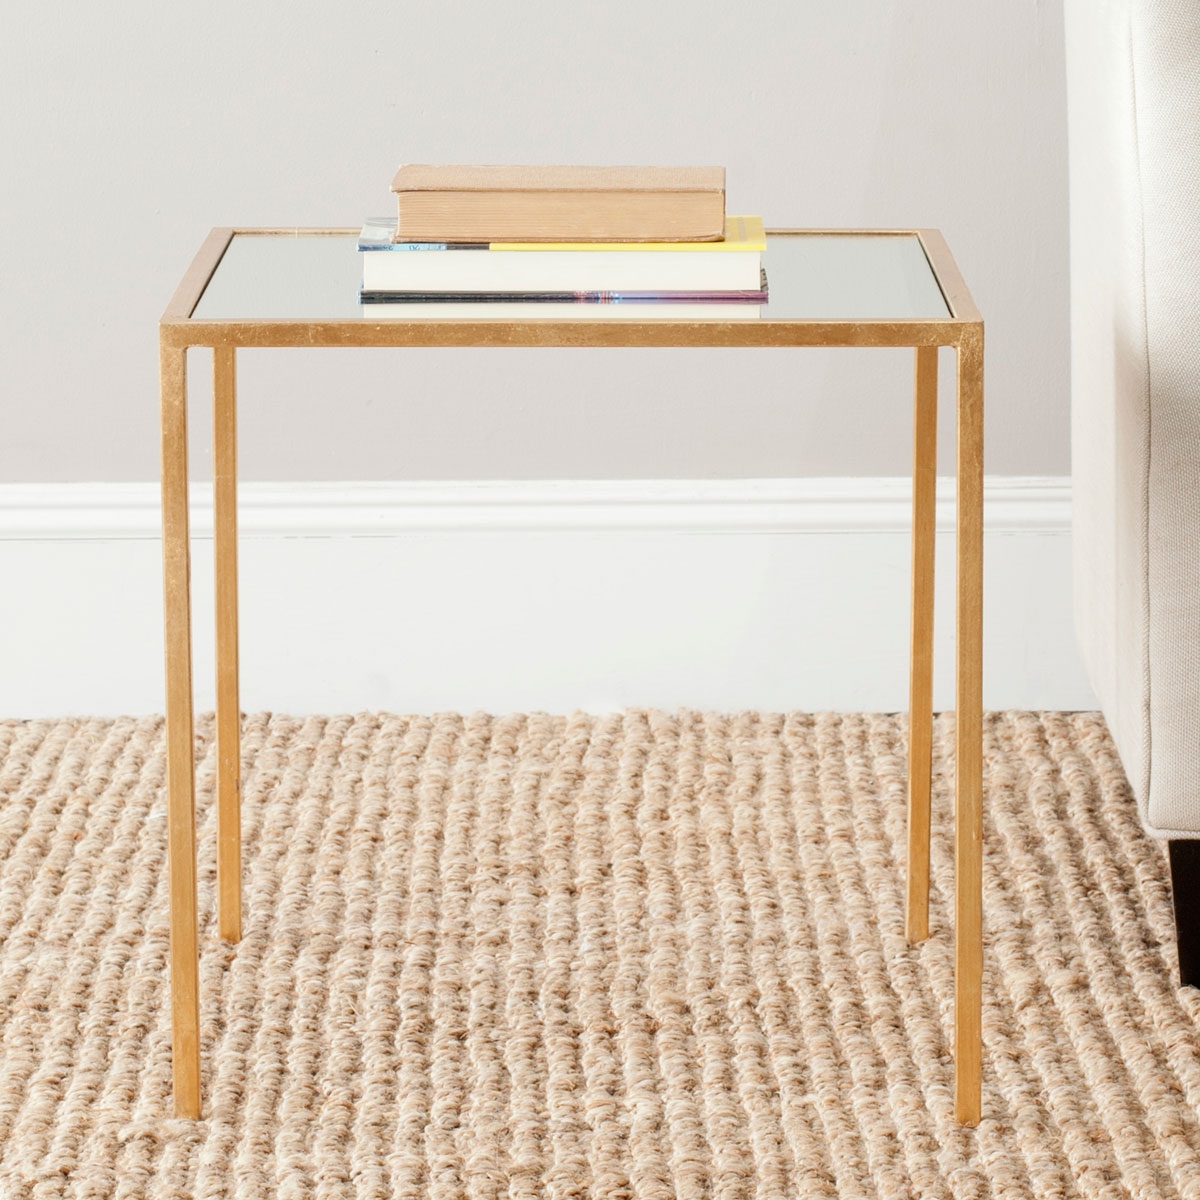 Kiley Mirror Top Accent Table - Gold - Arlo Home - Image 2